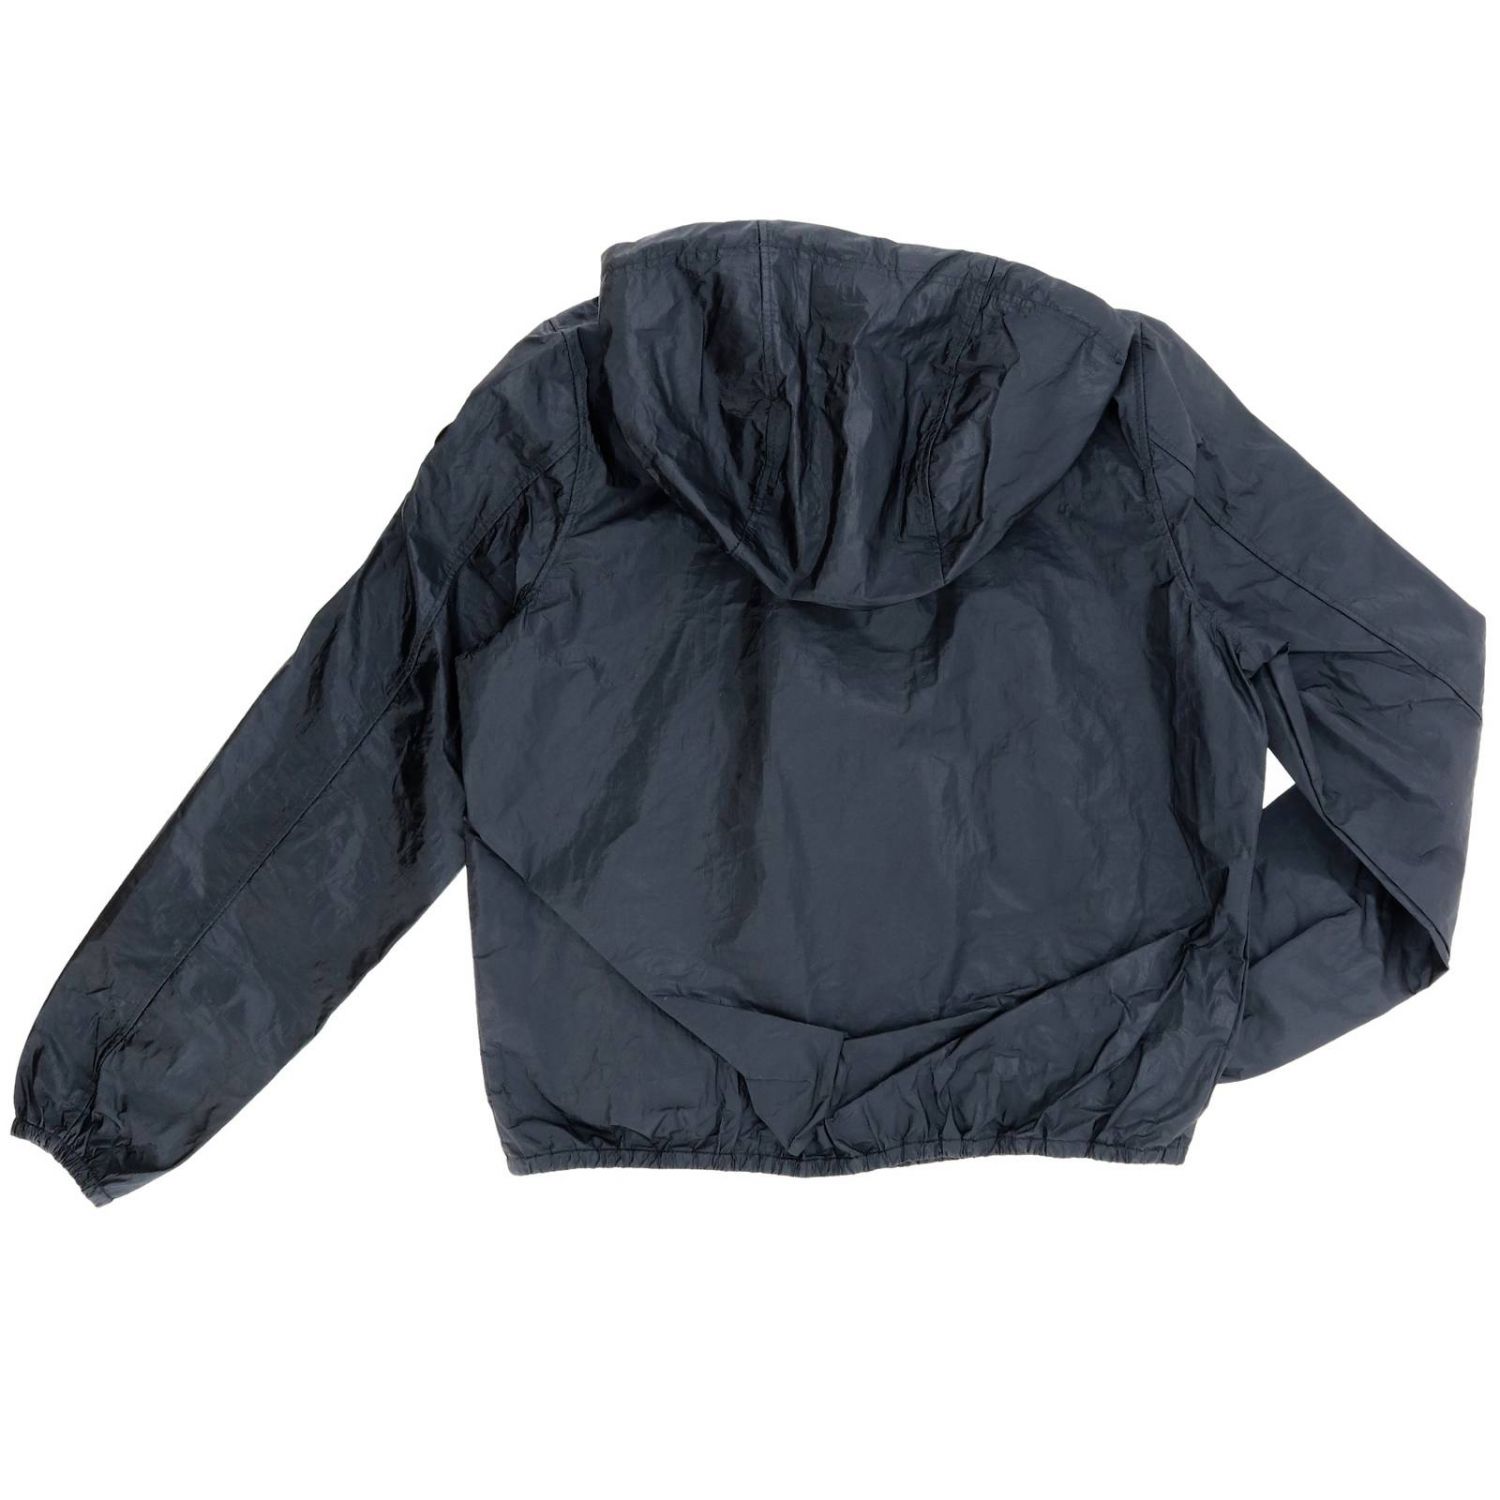 Museum Outlet: Jacket women - Blue | Jacket Museum TY414 GIGLIO.COM